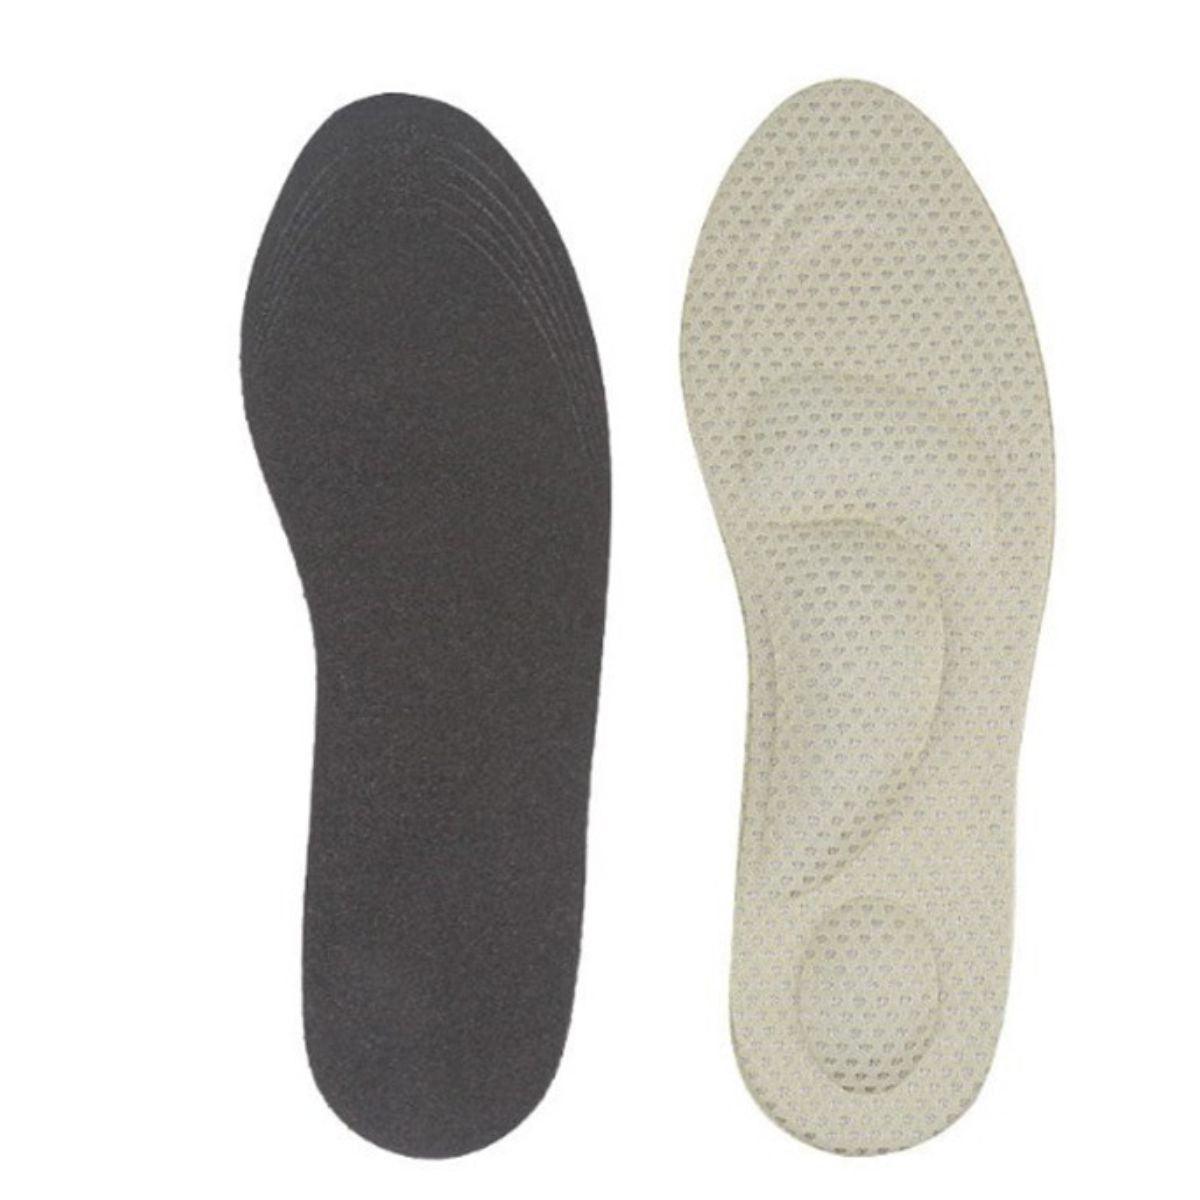 Foot Sole Comfort - tcistarhealthproducts